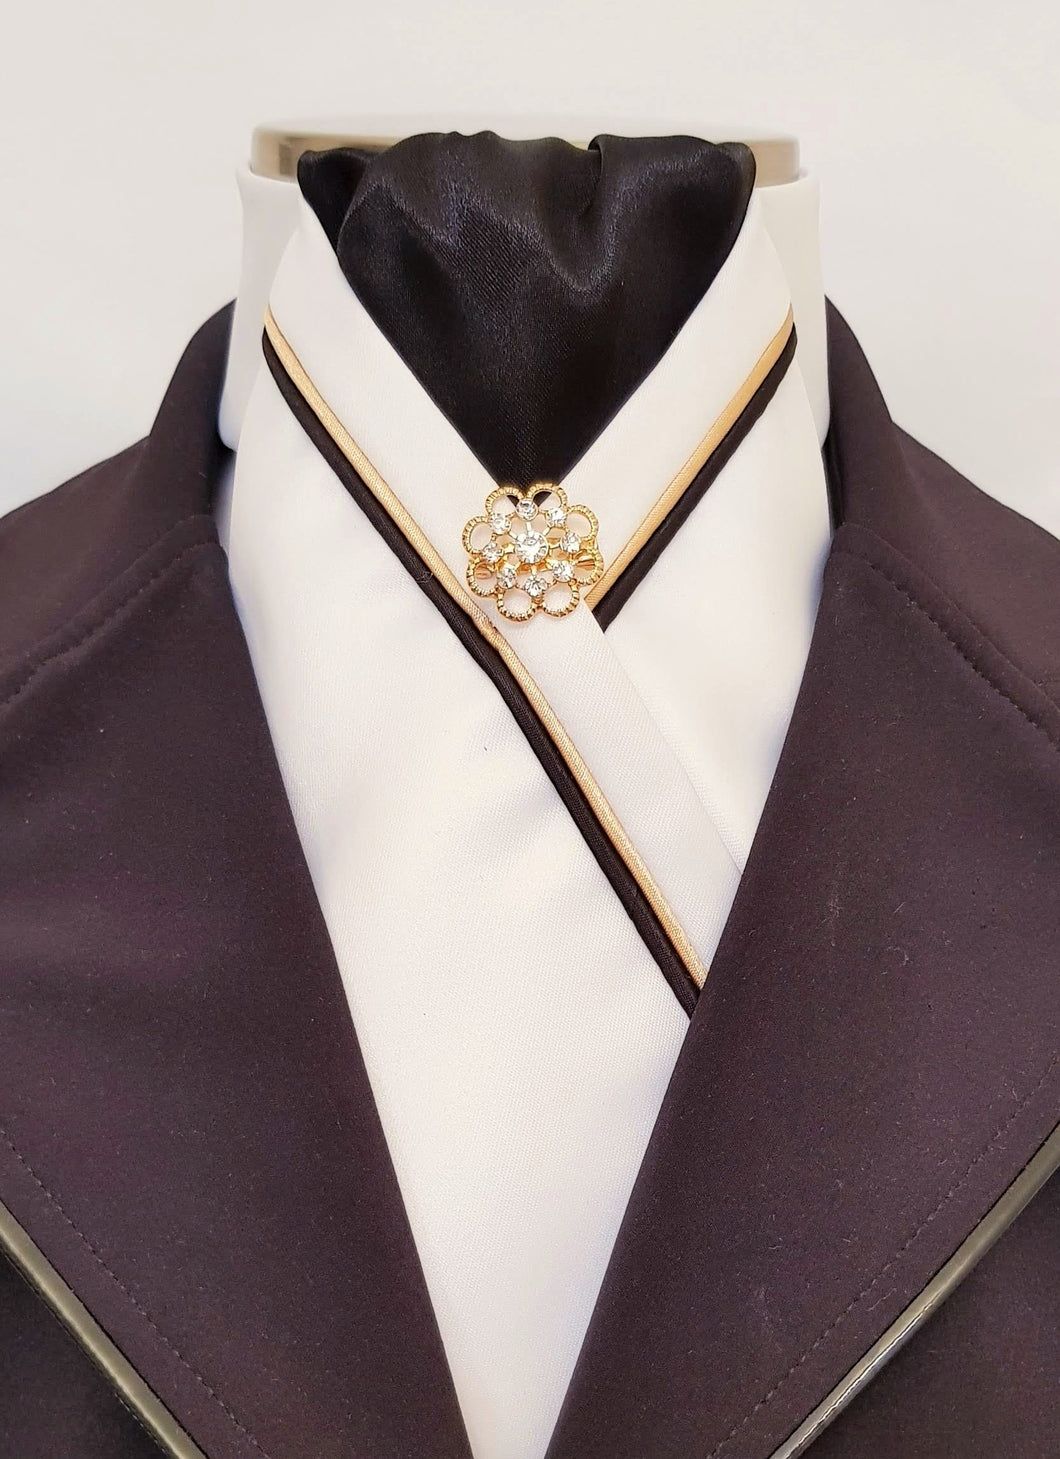 ERA AMANDA STOCK TIE - Cream satin and black, with gold & black piping and brooch